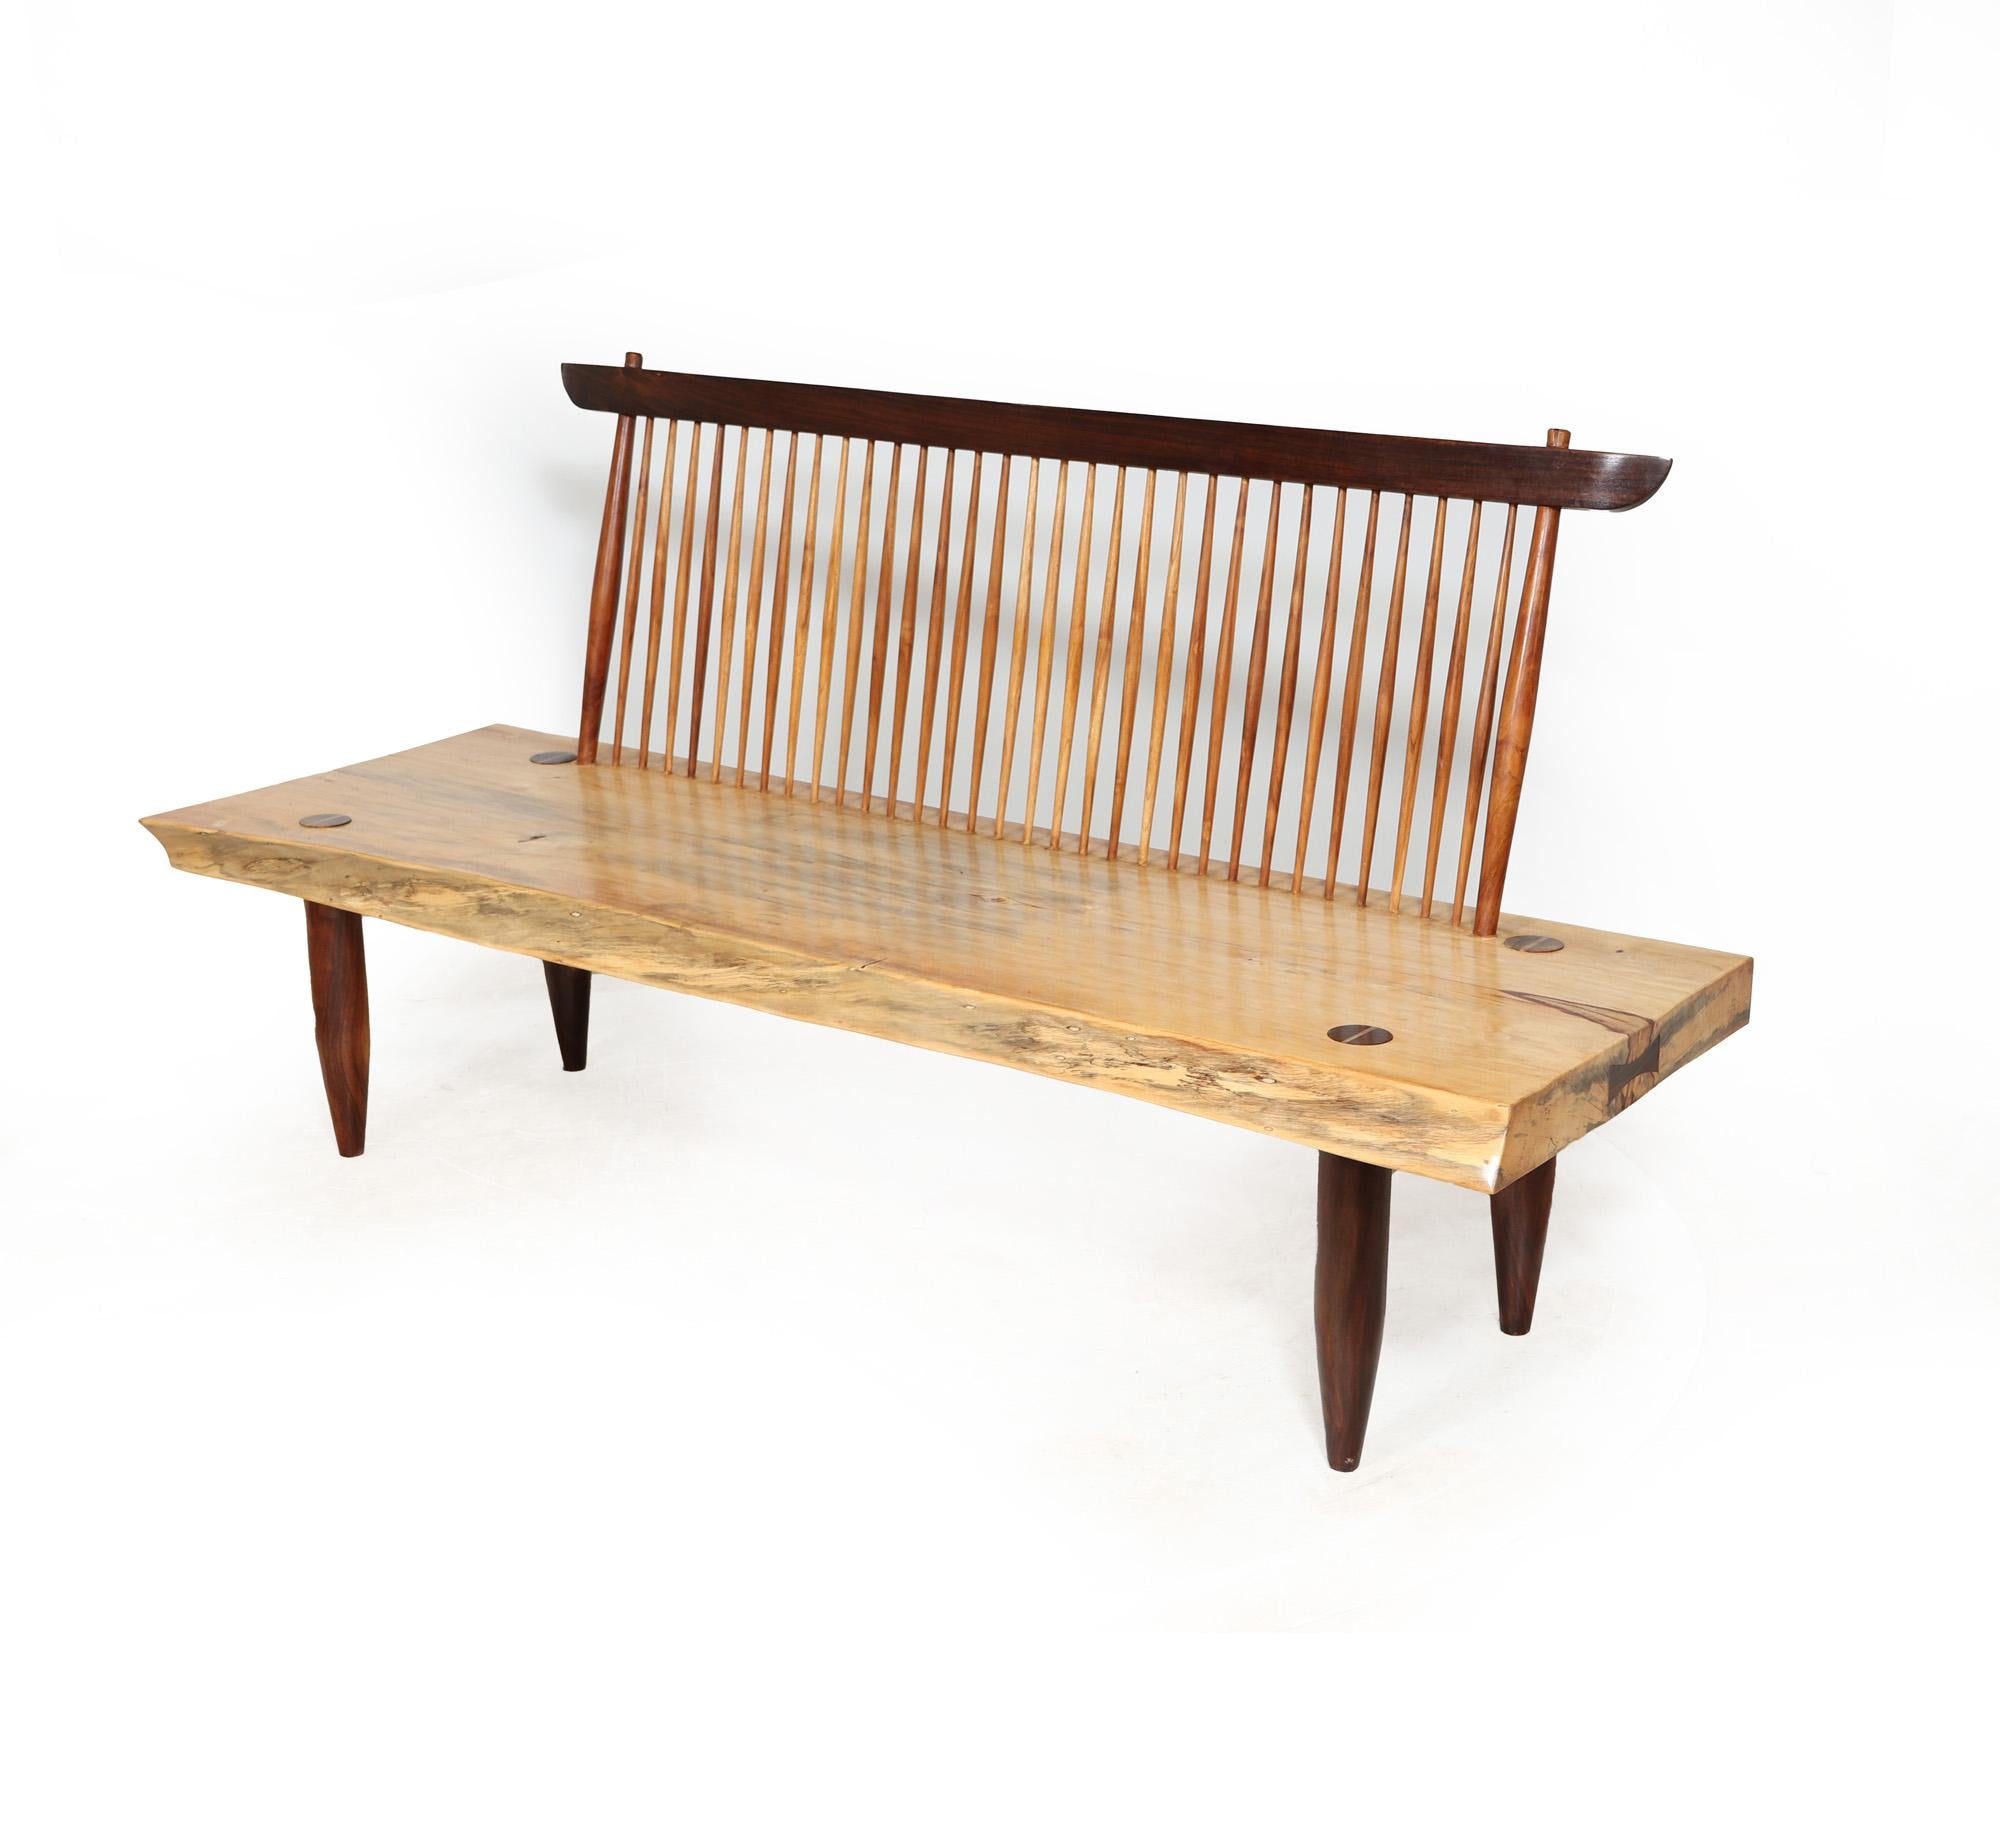 CONOID BENCH - NAKASHIMA C1980
George and Mira Nakashima style design Conoid bench, a stunning piece of furniture from the late 20th century. Crafted with precision in Teak and exotic wood, this sofa embodies the renowned American designer